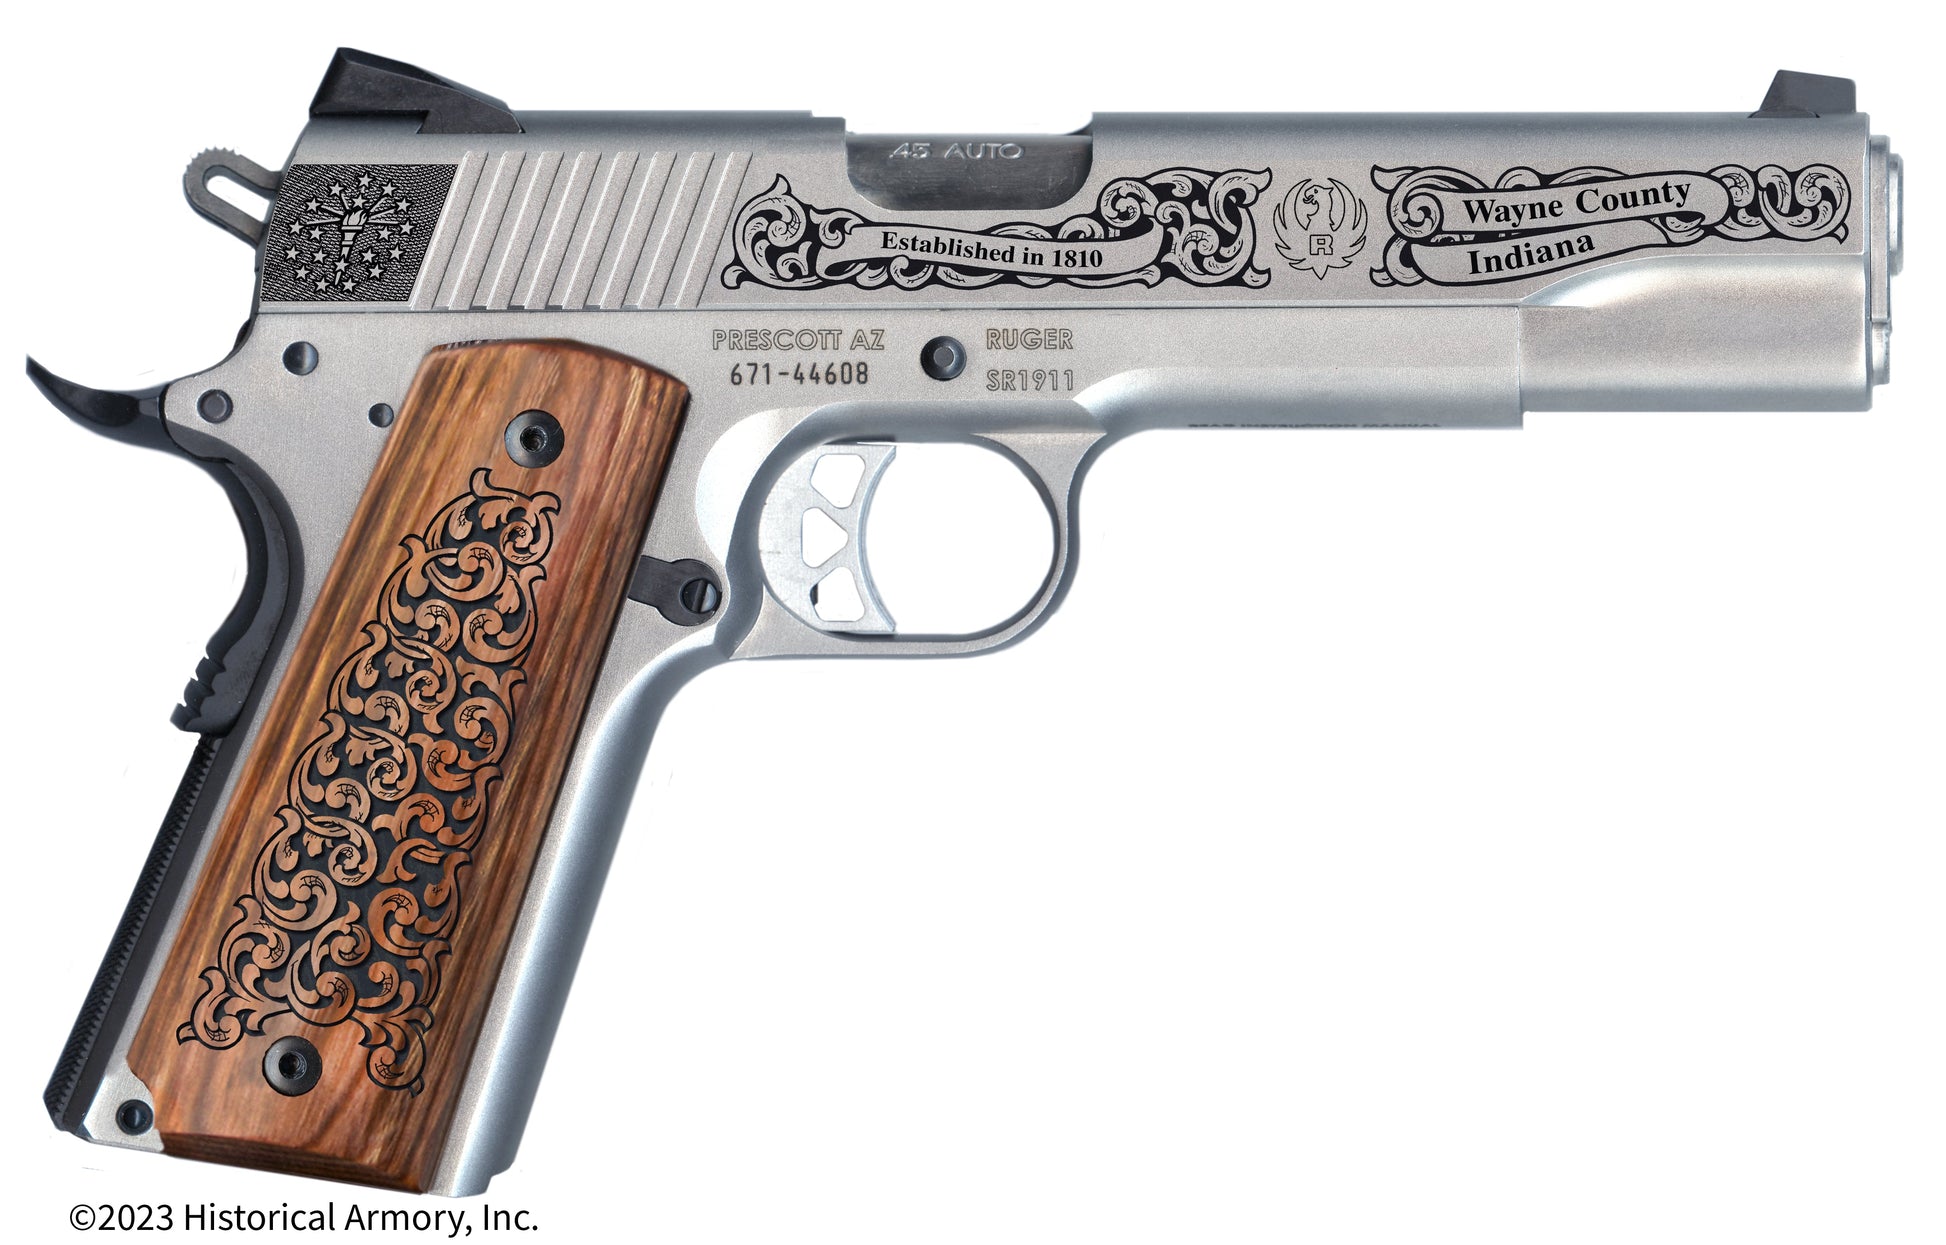 Wayne County Indiana Engraved .45 Auto Ruger 1911